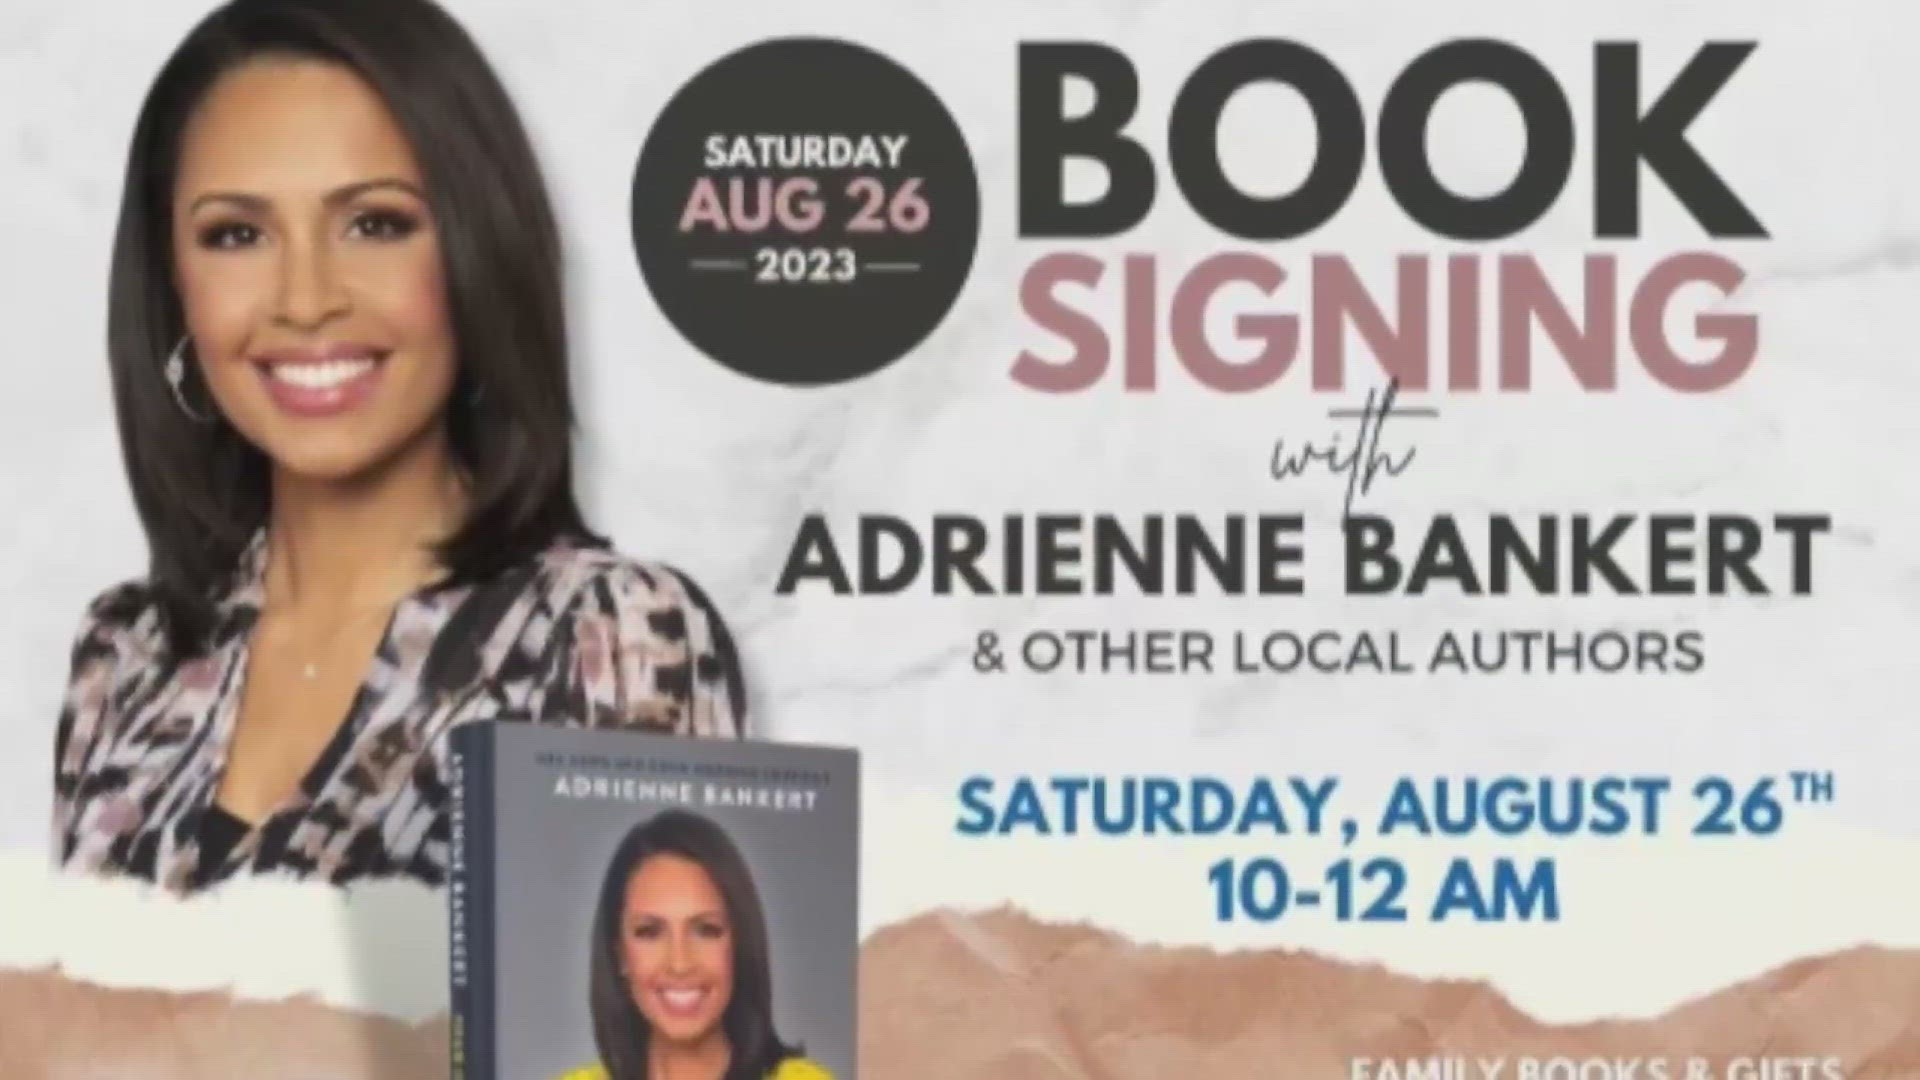 Adrienne Bankert, best known from Good Morning America, is one of Sacramento's most successful journalists and she wrote a book on kindness.